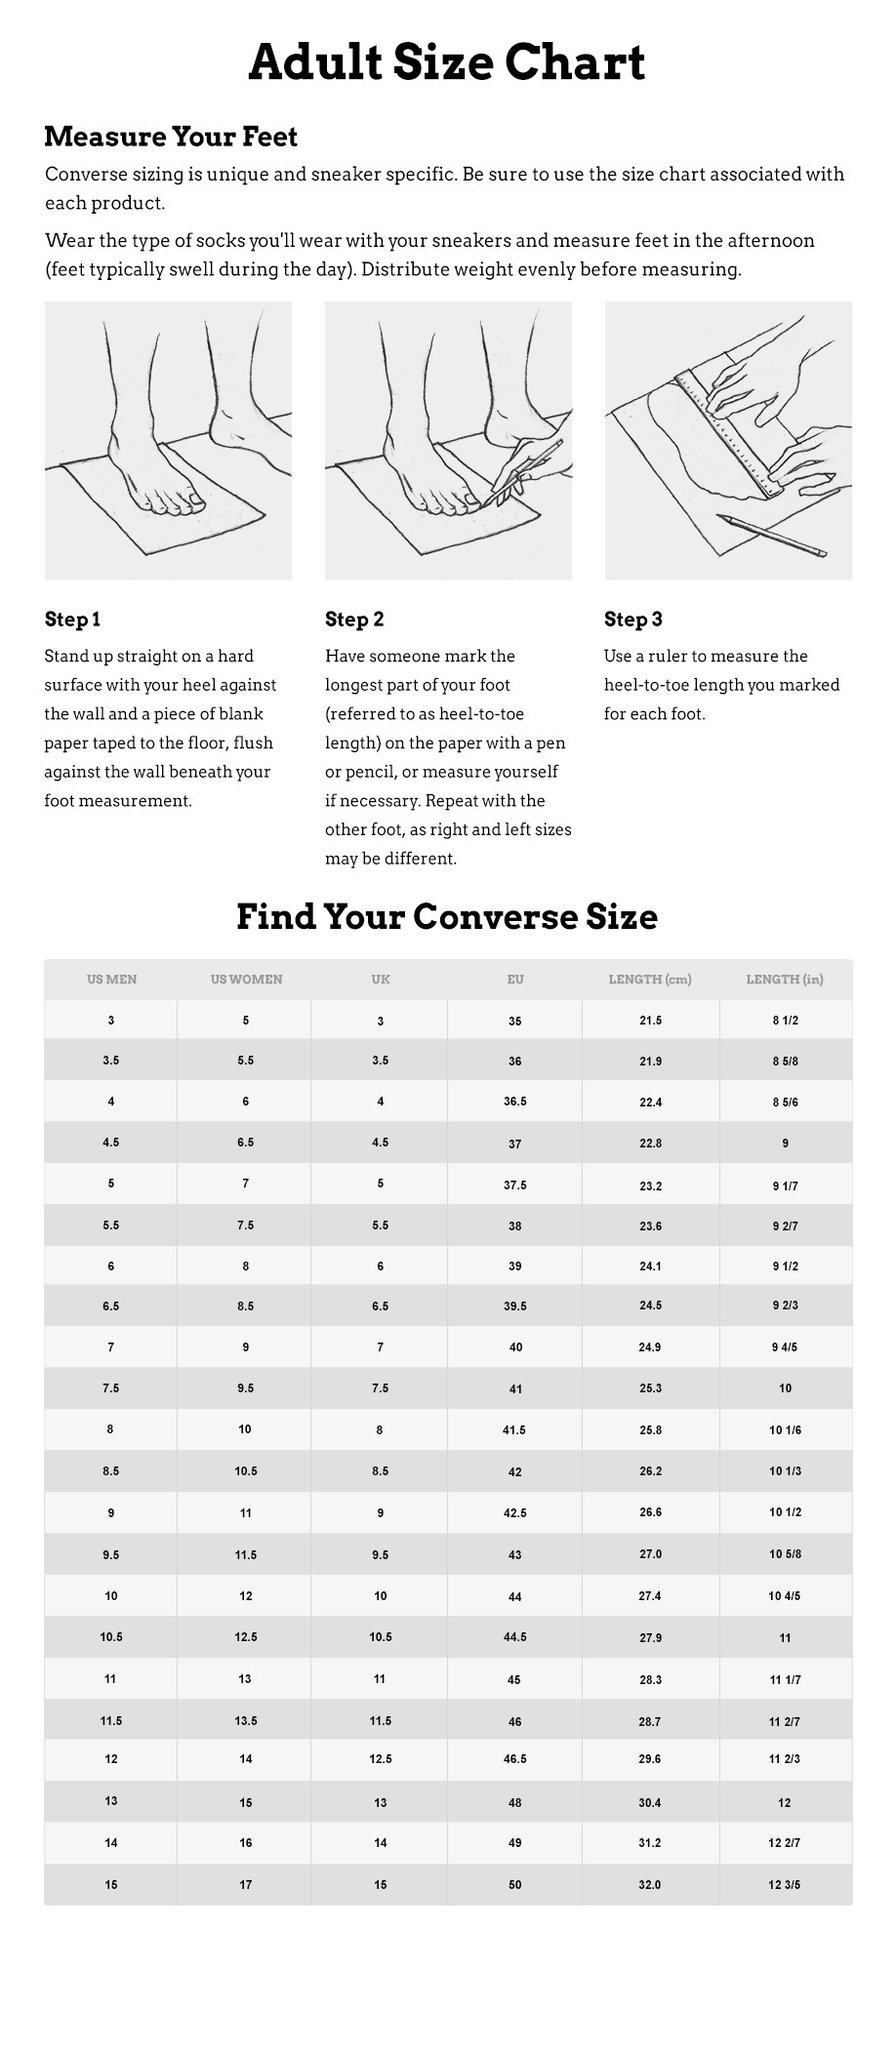 how to order converse shoes size